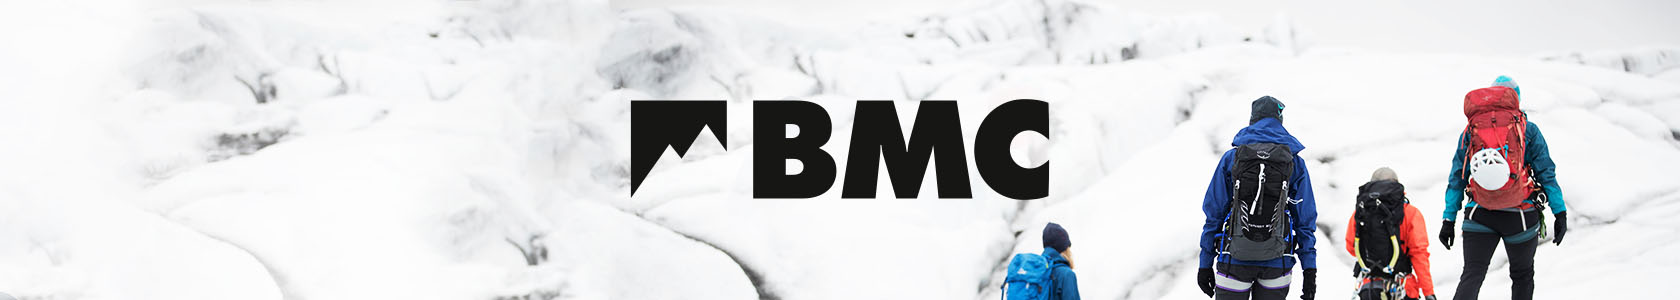 BMC logo in black on a white snowy background with 4 people to the right of the screen wearing ski gear